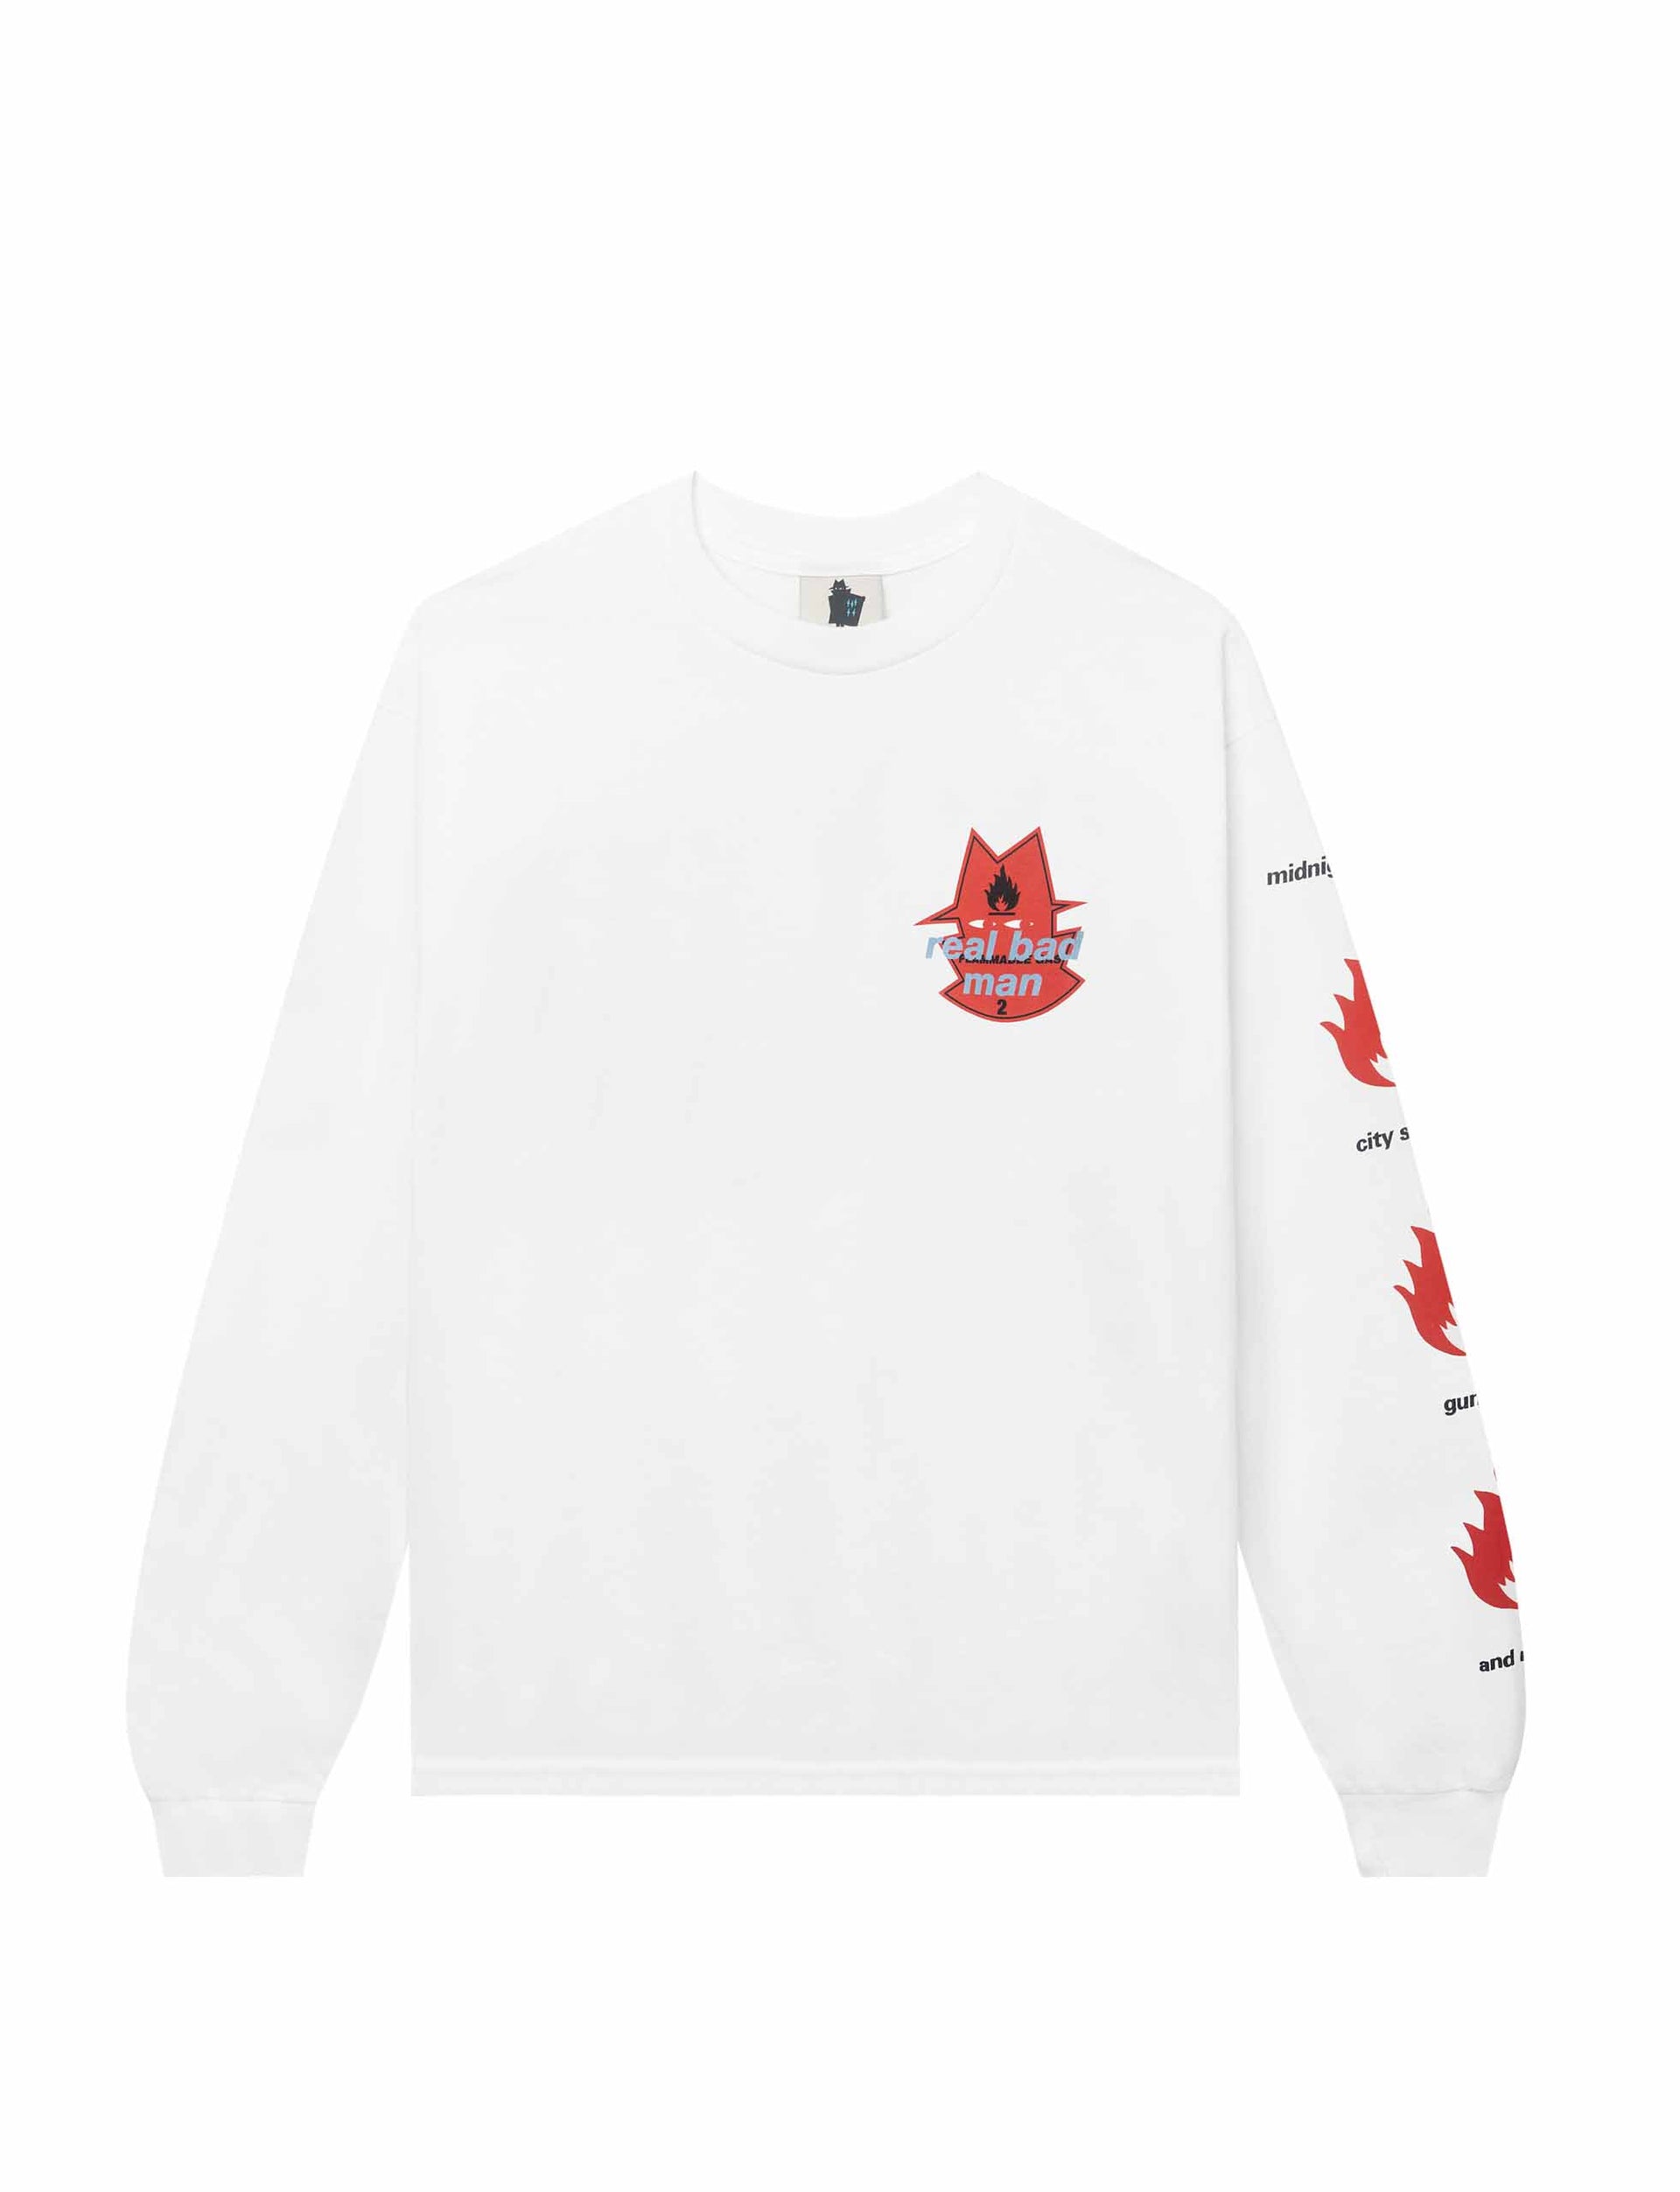 REAL BAD MAN FLAMMABLE GAS L/S TEE